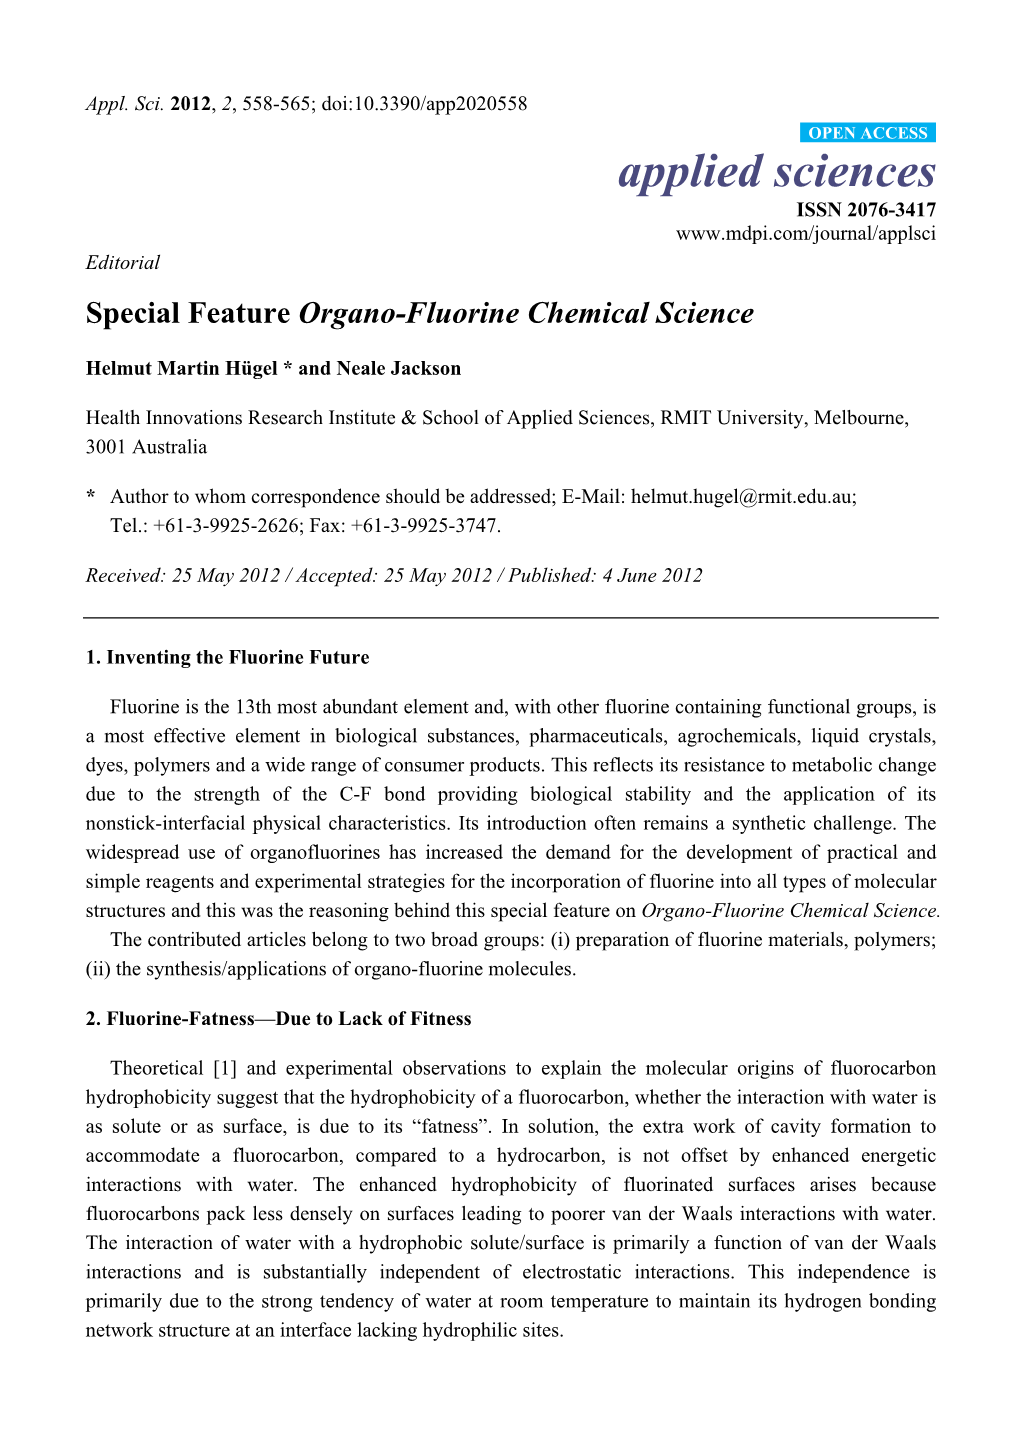 Special Feature Organo-Fluorine Chemical Science